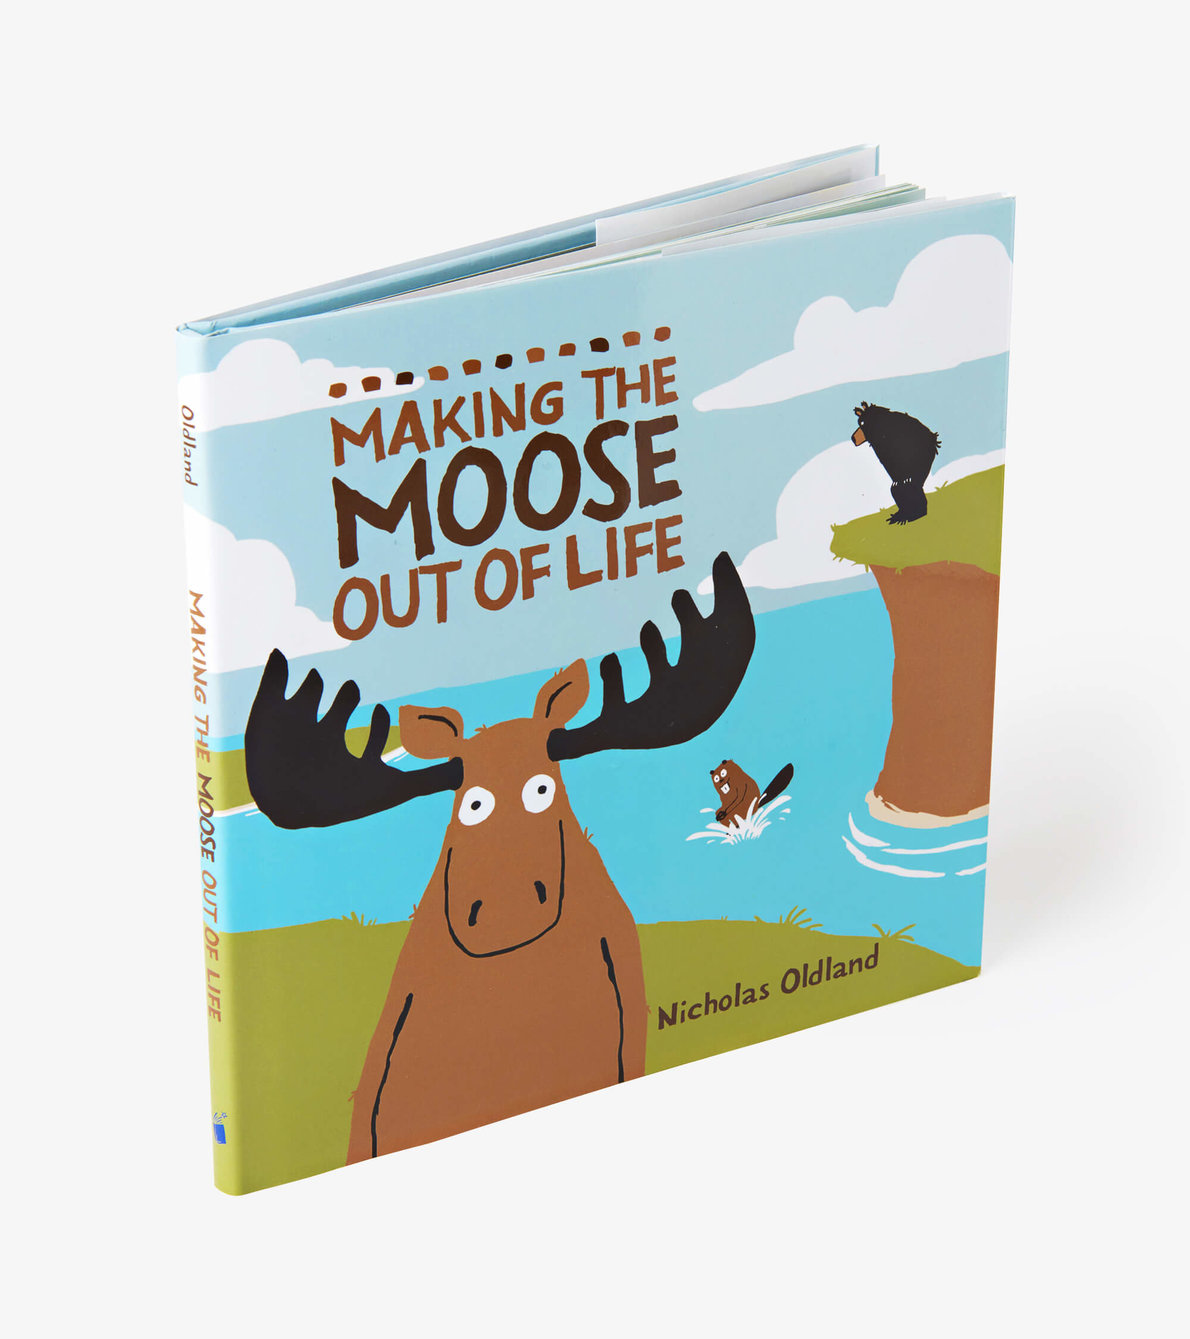 View larger image of "Making The Moose Out Of Life" Children's Book